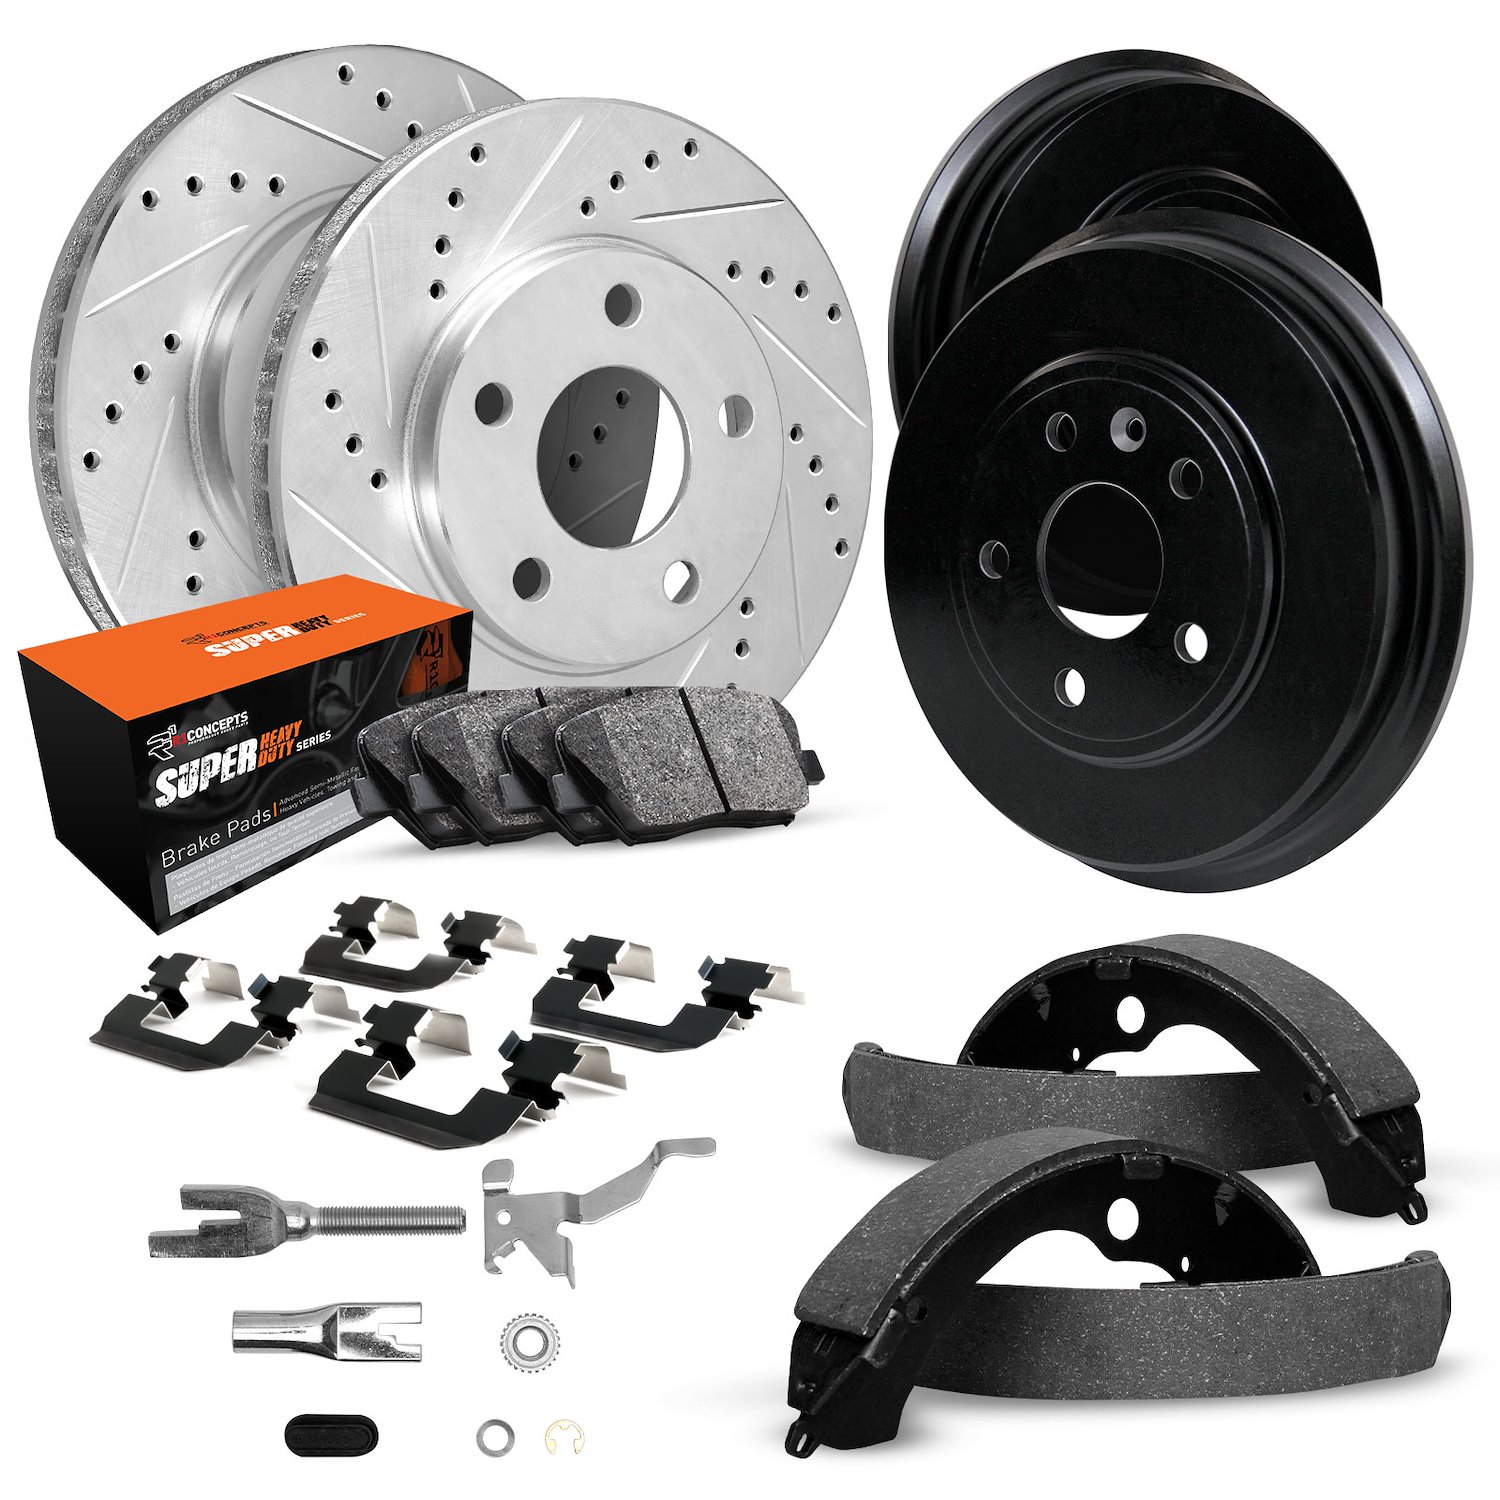 E-Line Drilled/Slotted Silver Rotor & Drum Set w/Super-Duty Pads, Shoes/Hardware/Adjusters, 1989-1993 Mopar